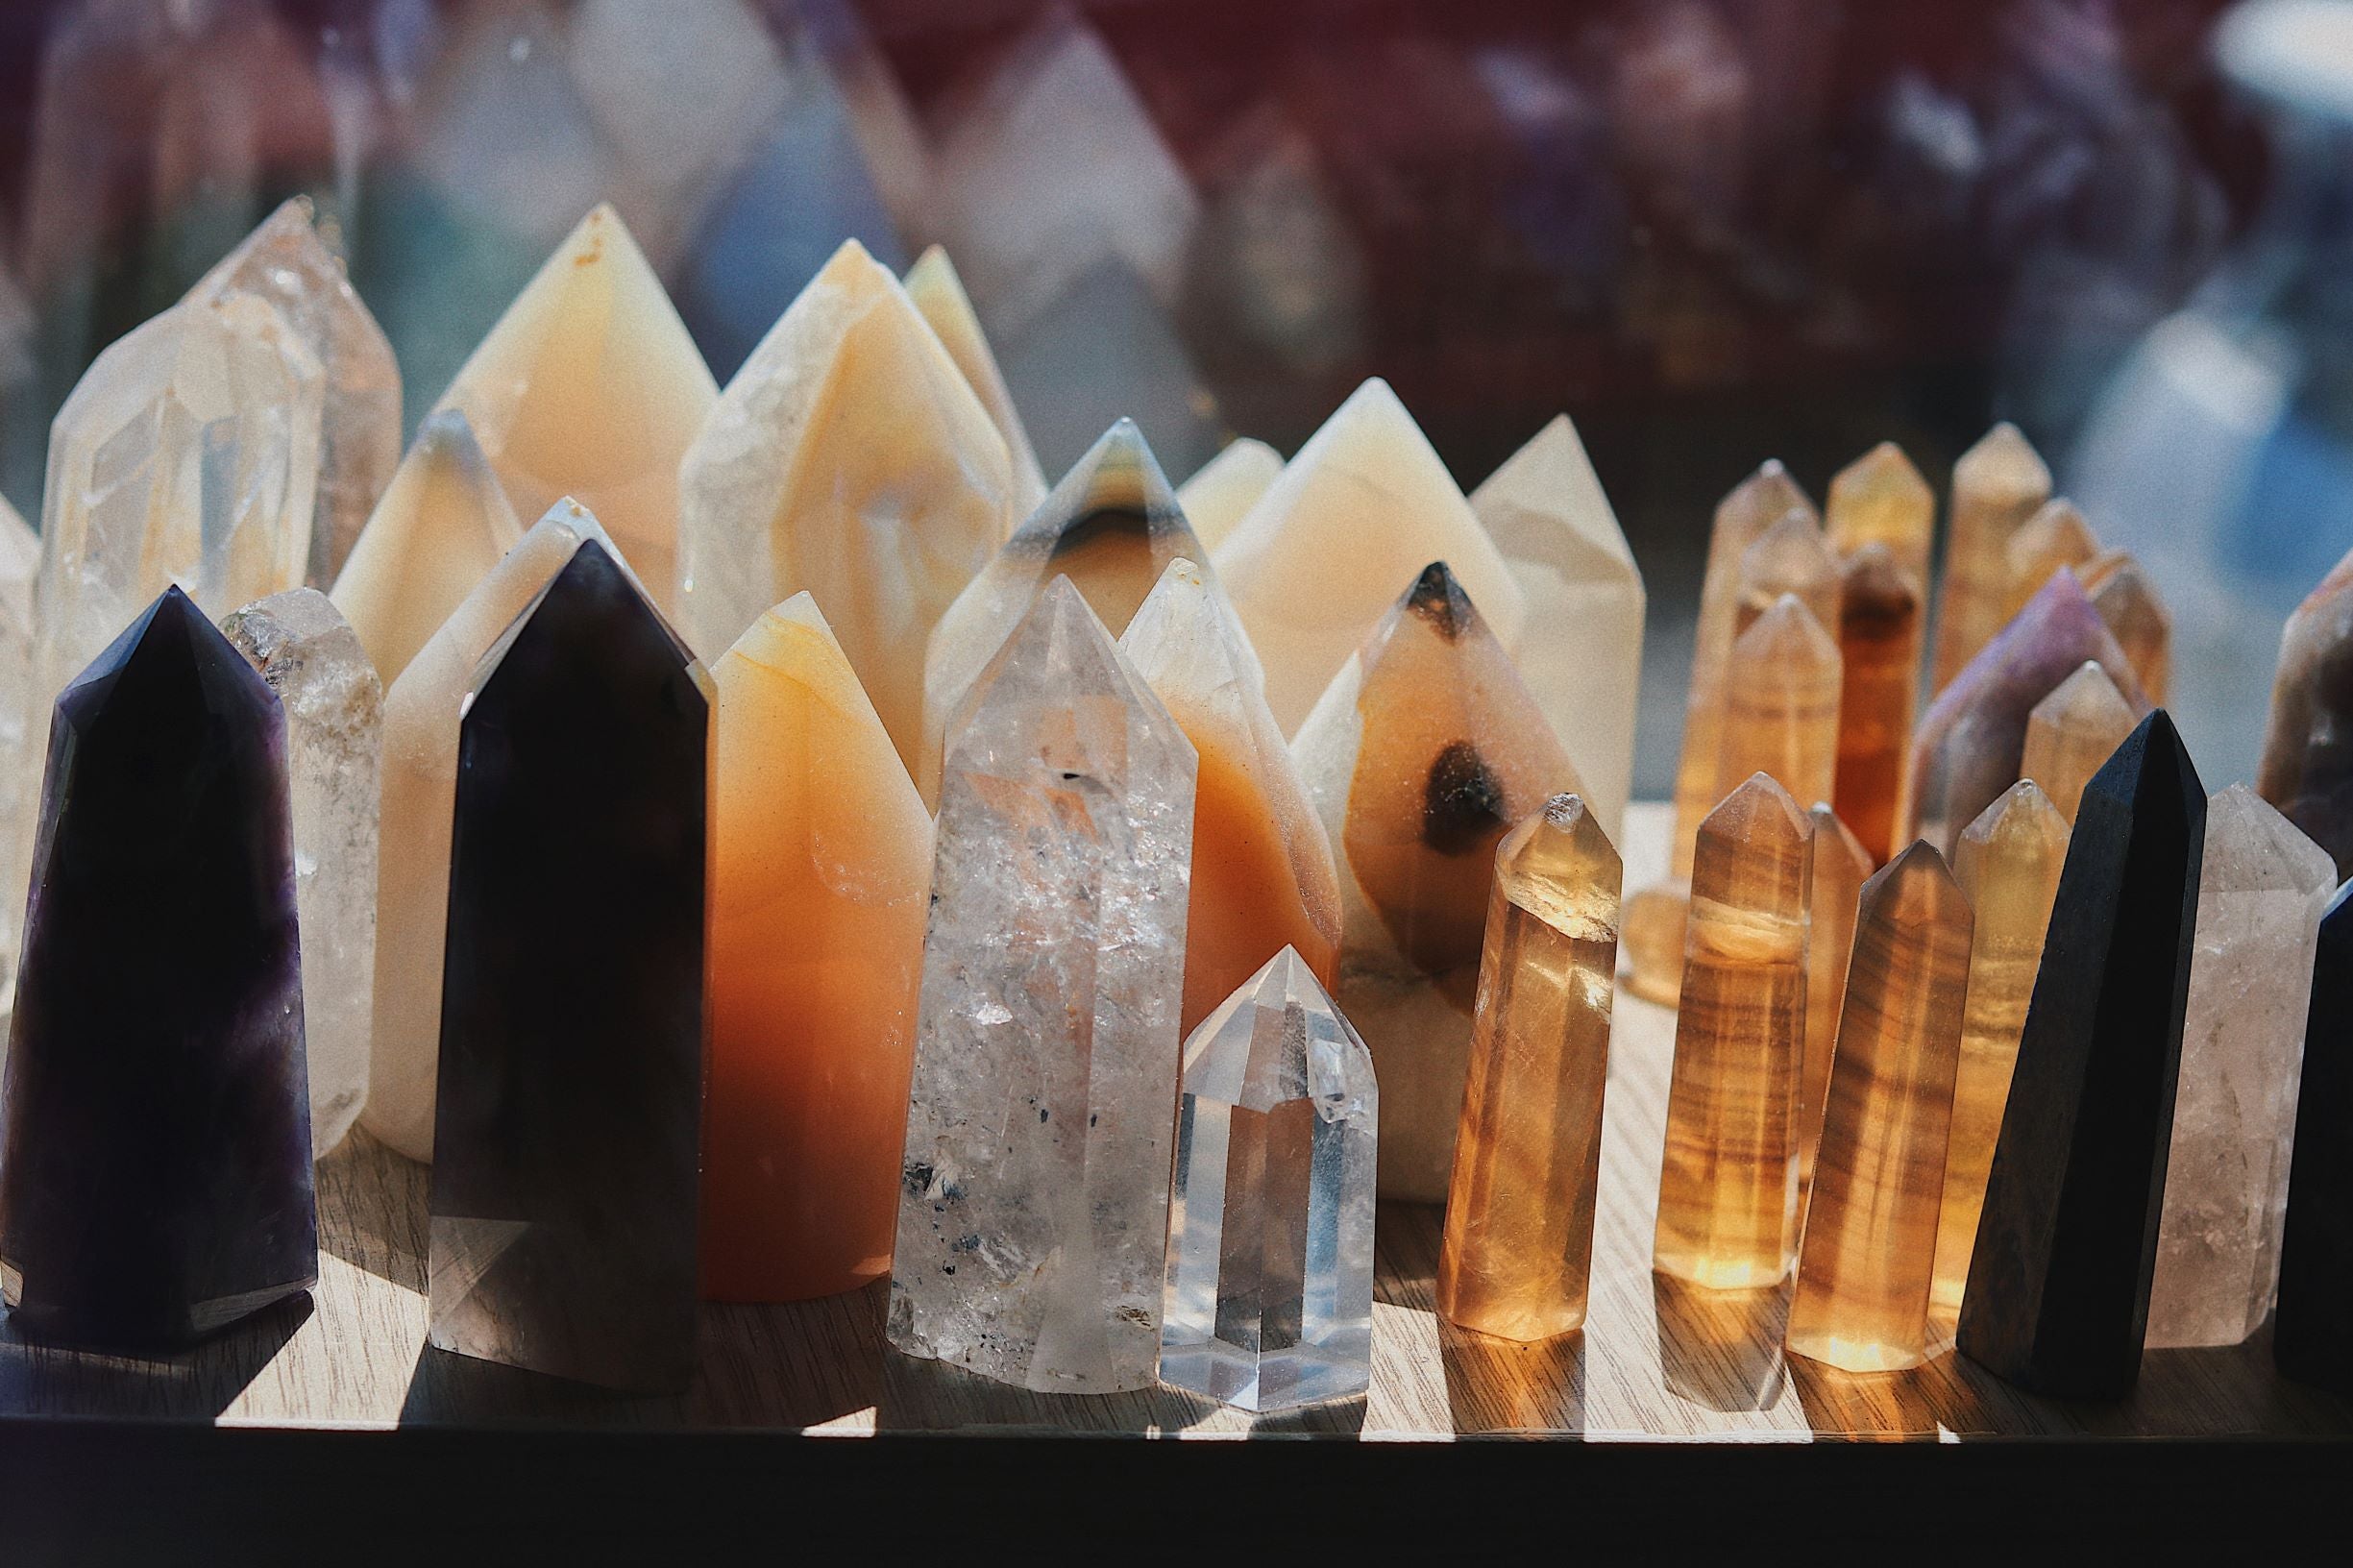 A collected of pointed crystals charging in the sunlight of a windowsill. 